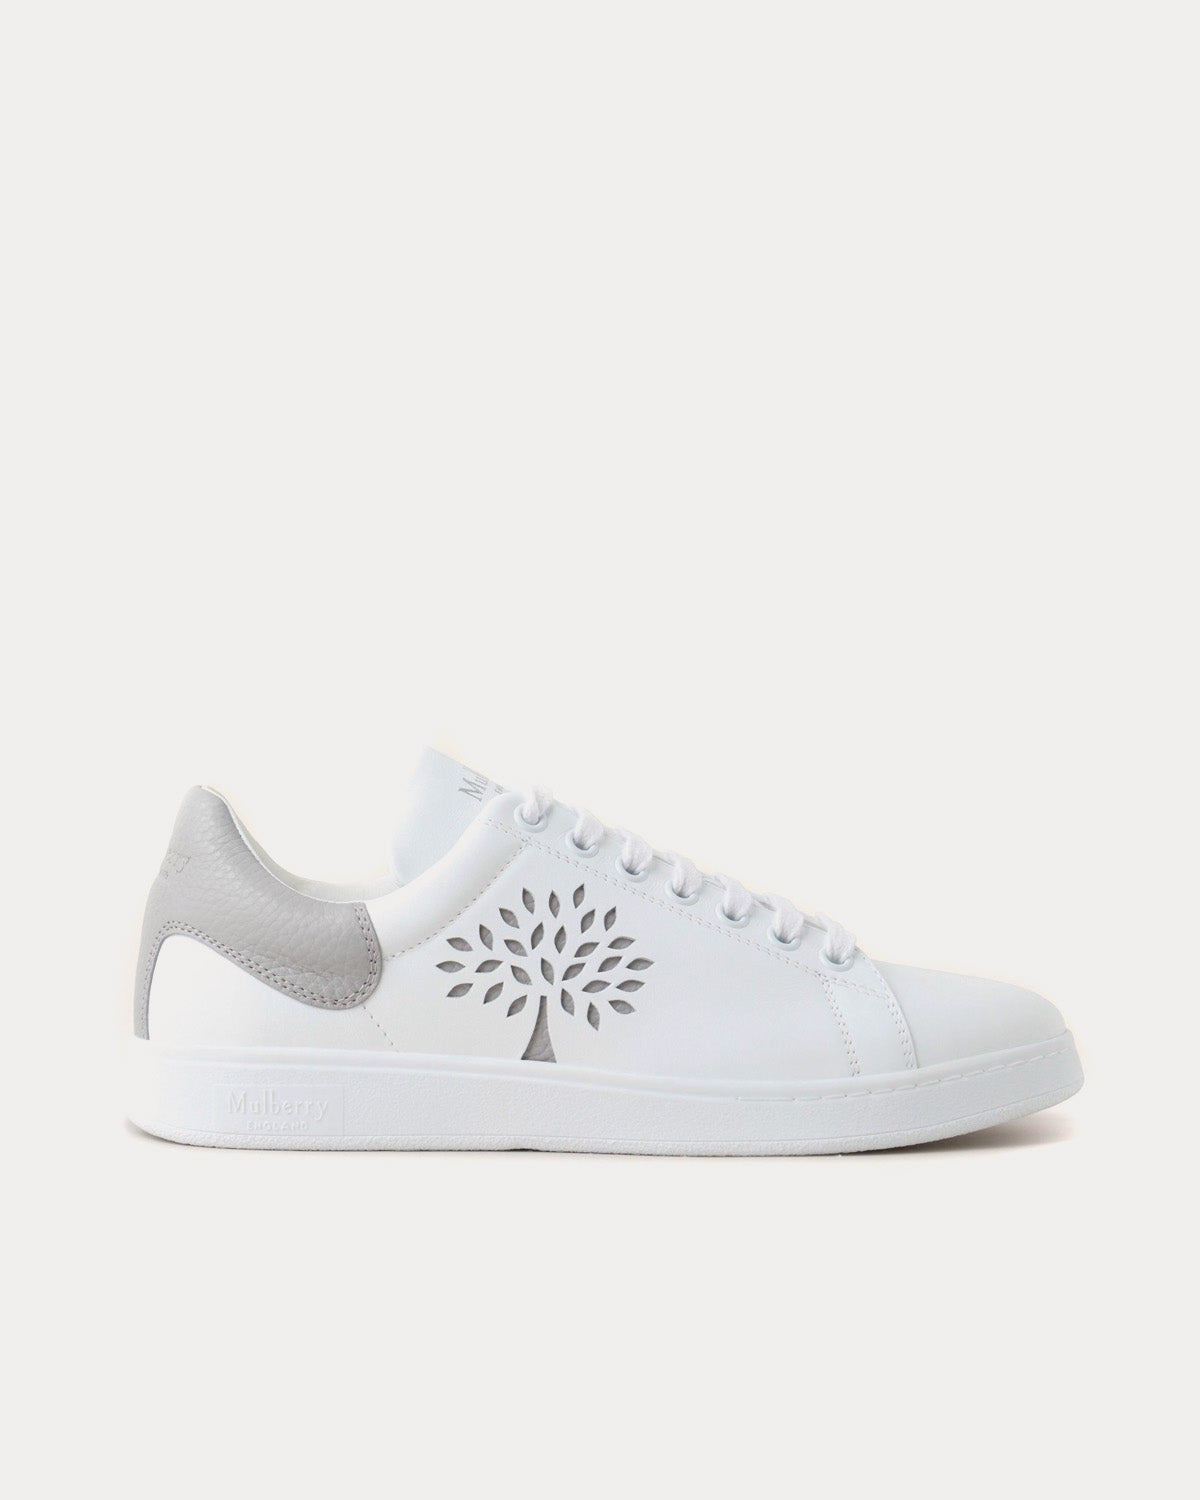 Mulberry - Tree Tennis Bovine Leather Pale Grey Low Top Sneakers